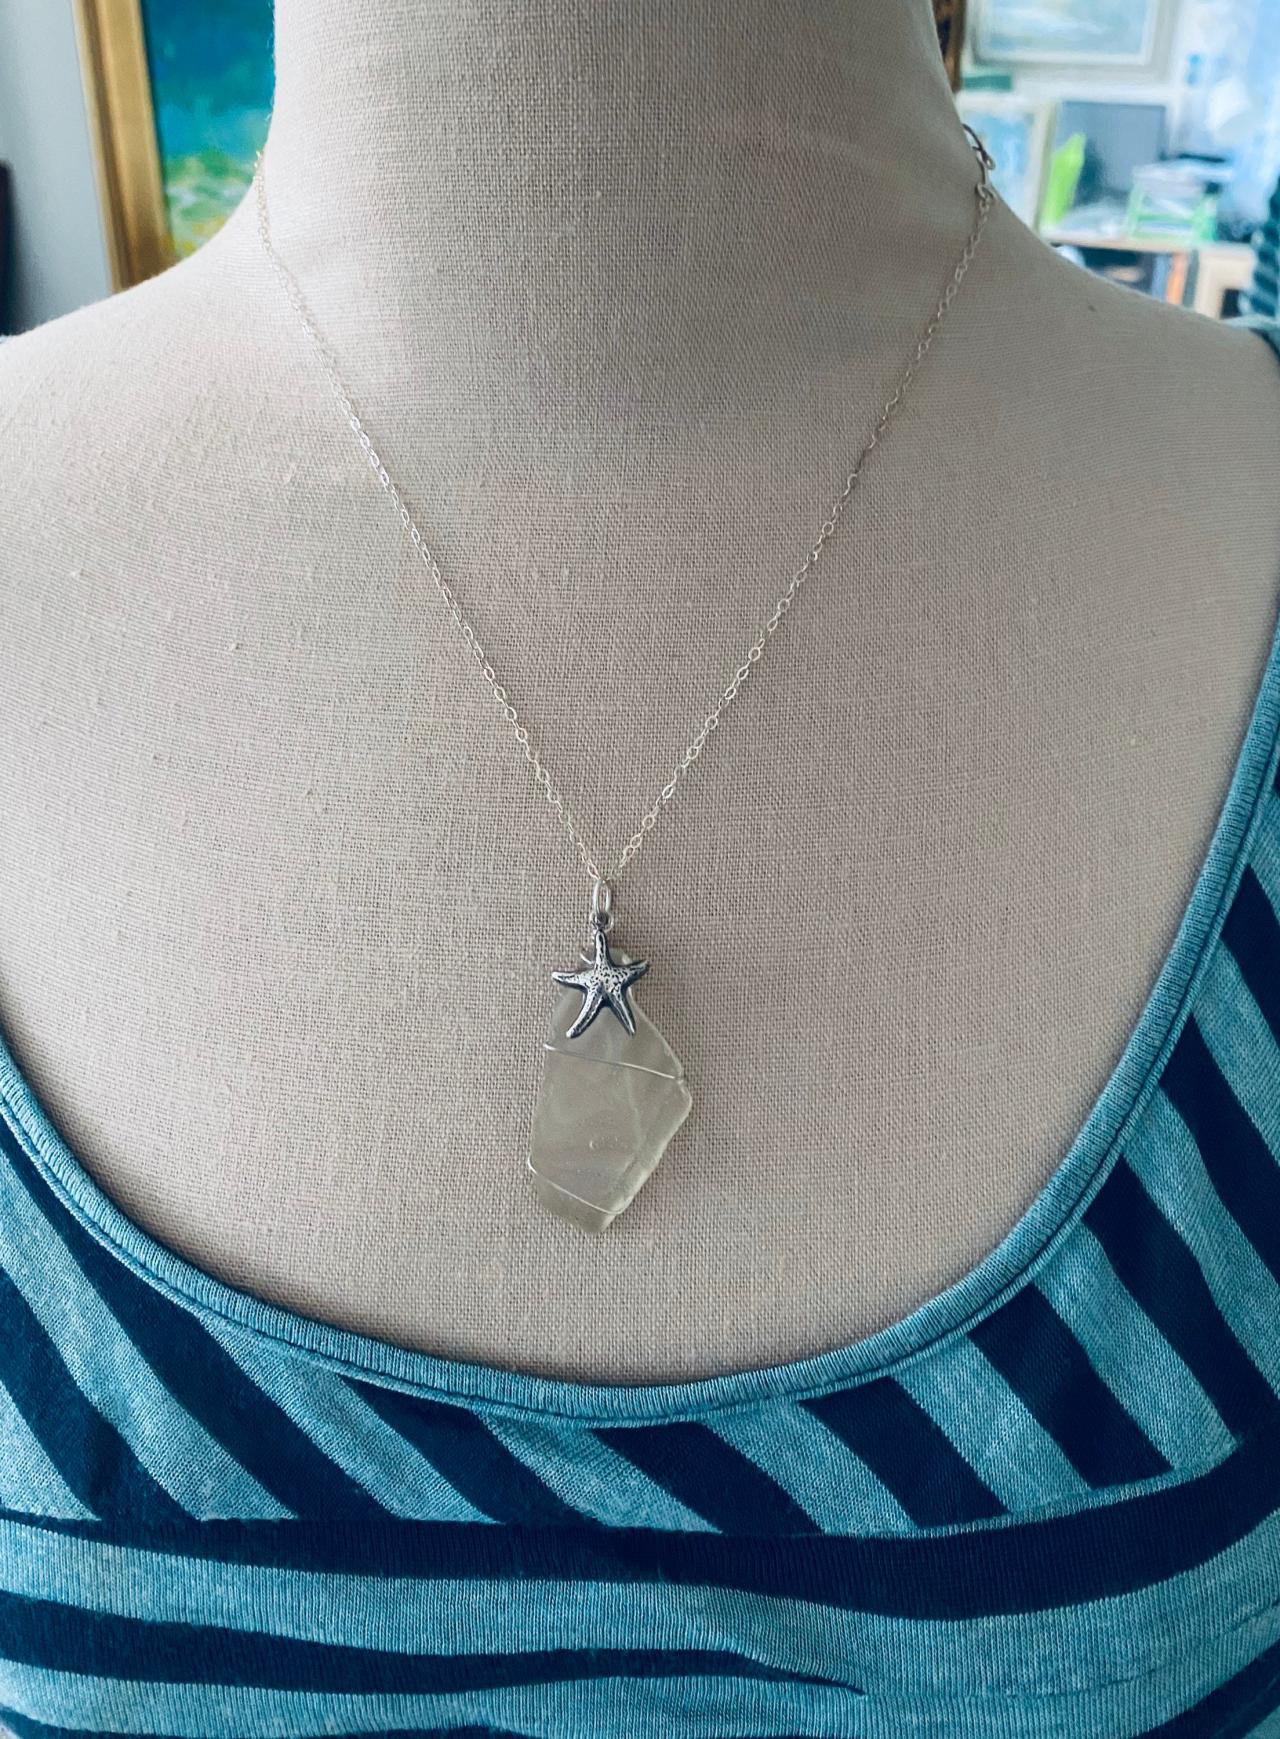 Sea Glass Necklace Clear With Silver Starfish Charm Sterling Silver Jewelry Beachy Summer Bridesmaid Beach Weddings